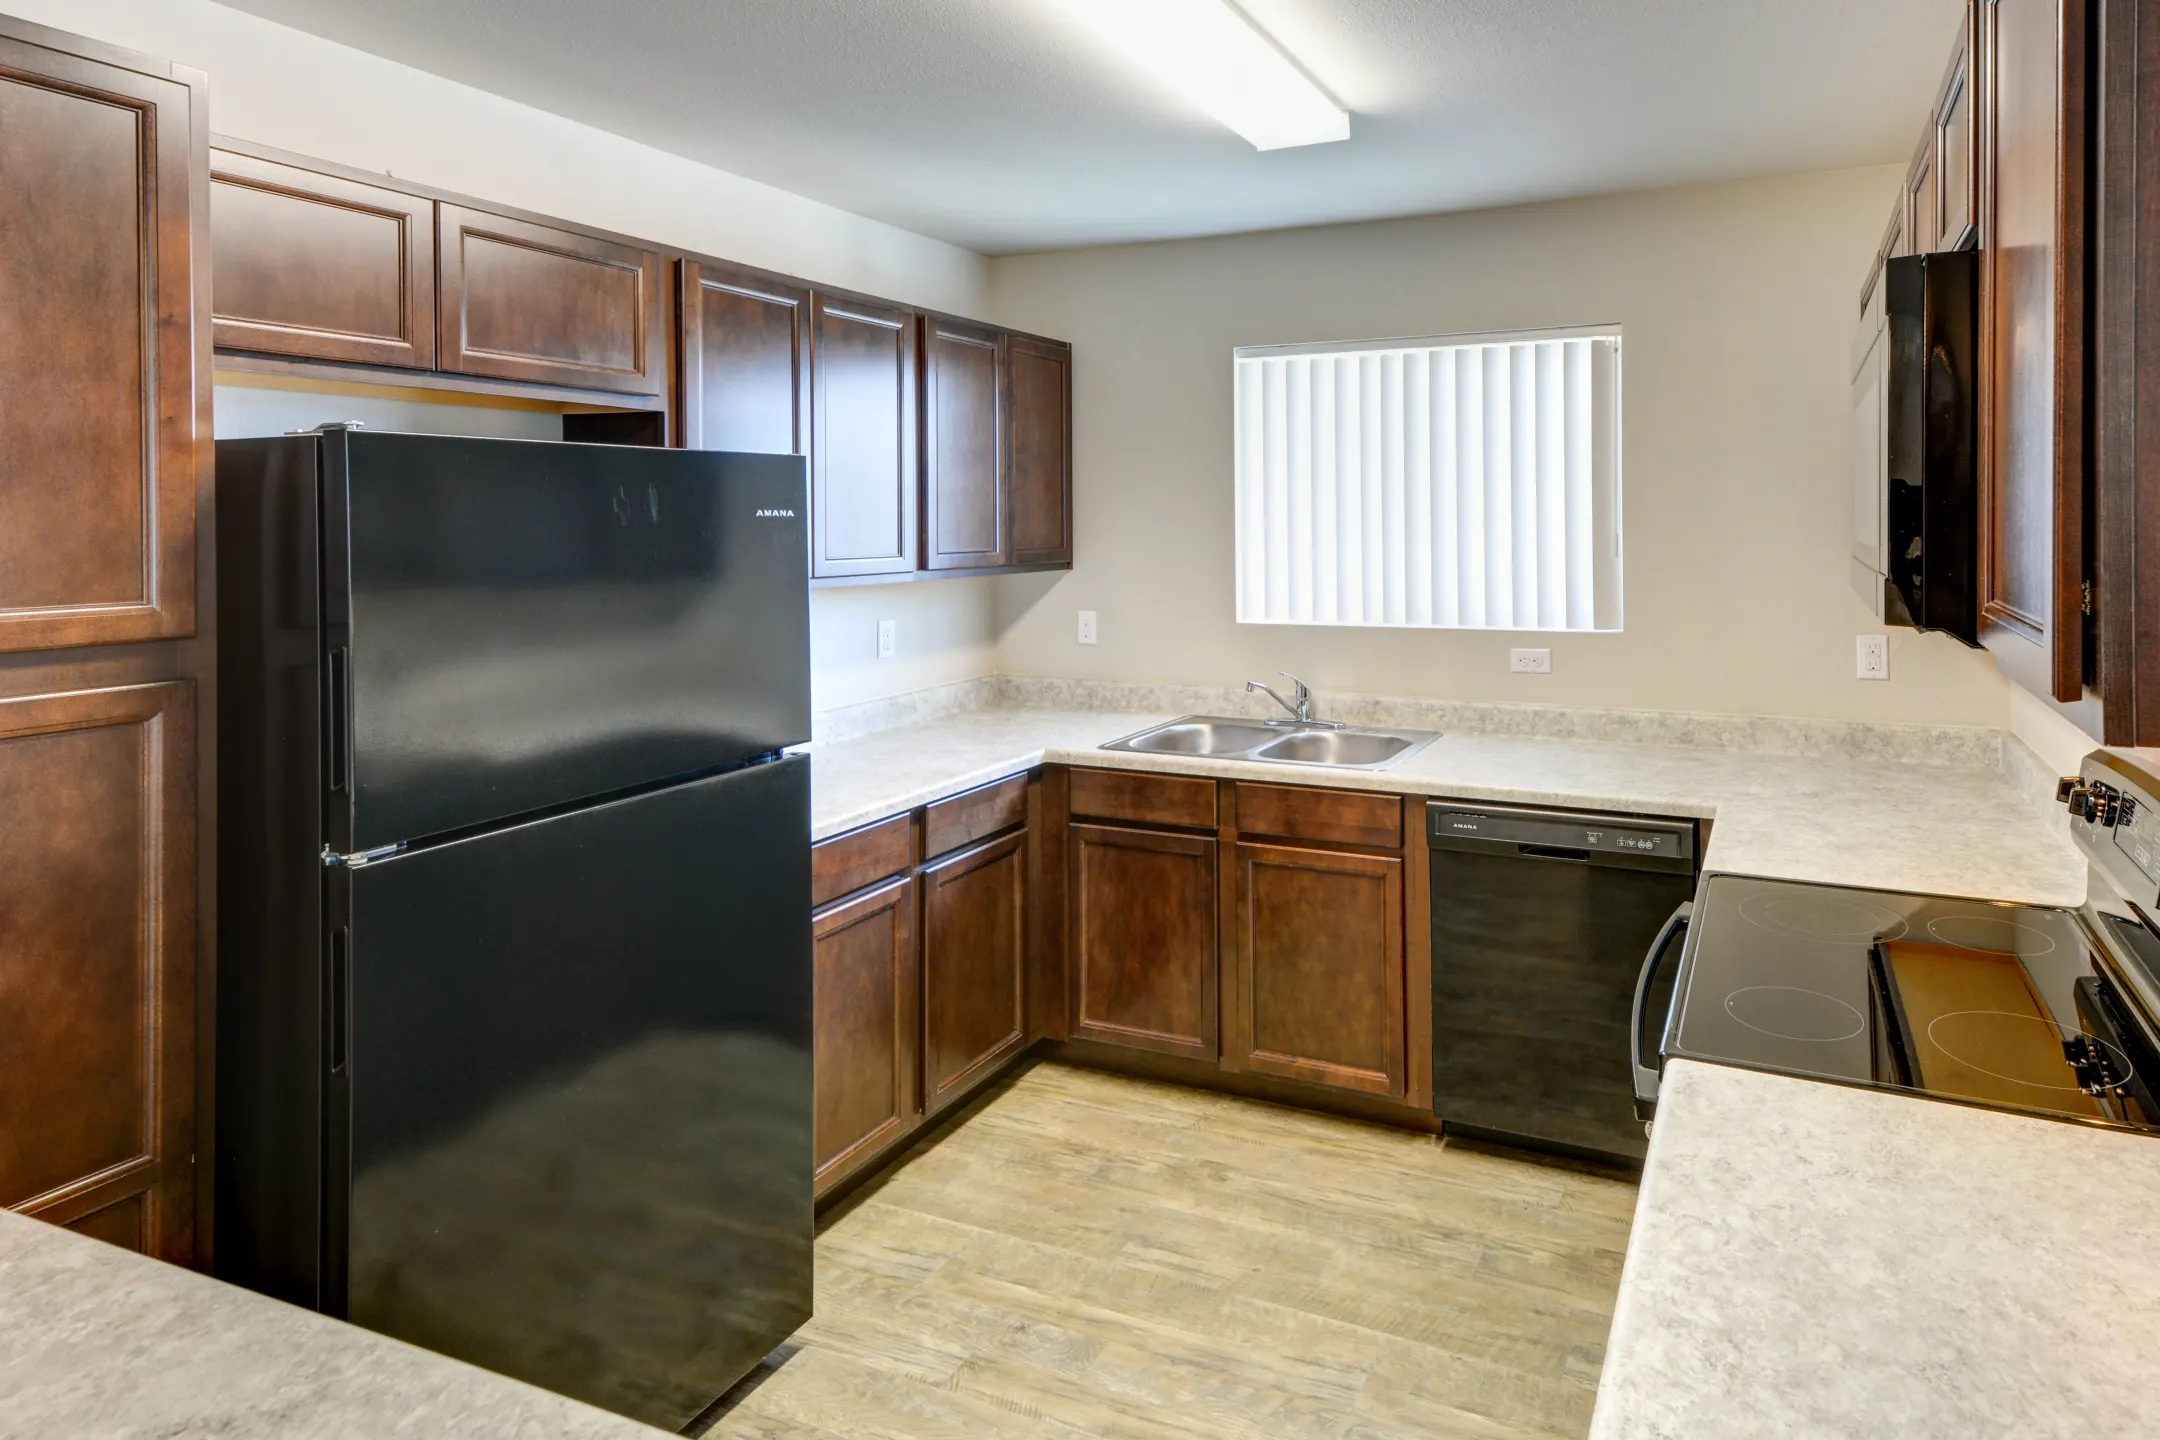 Kitchen - Crown Pointe Apartments - Post Falls, ID